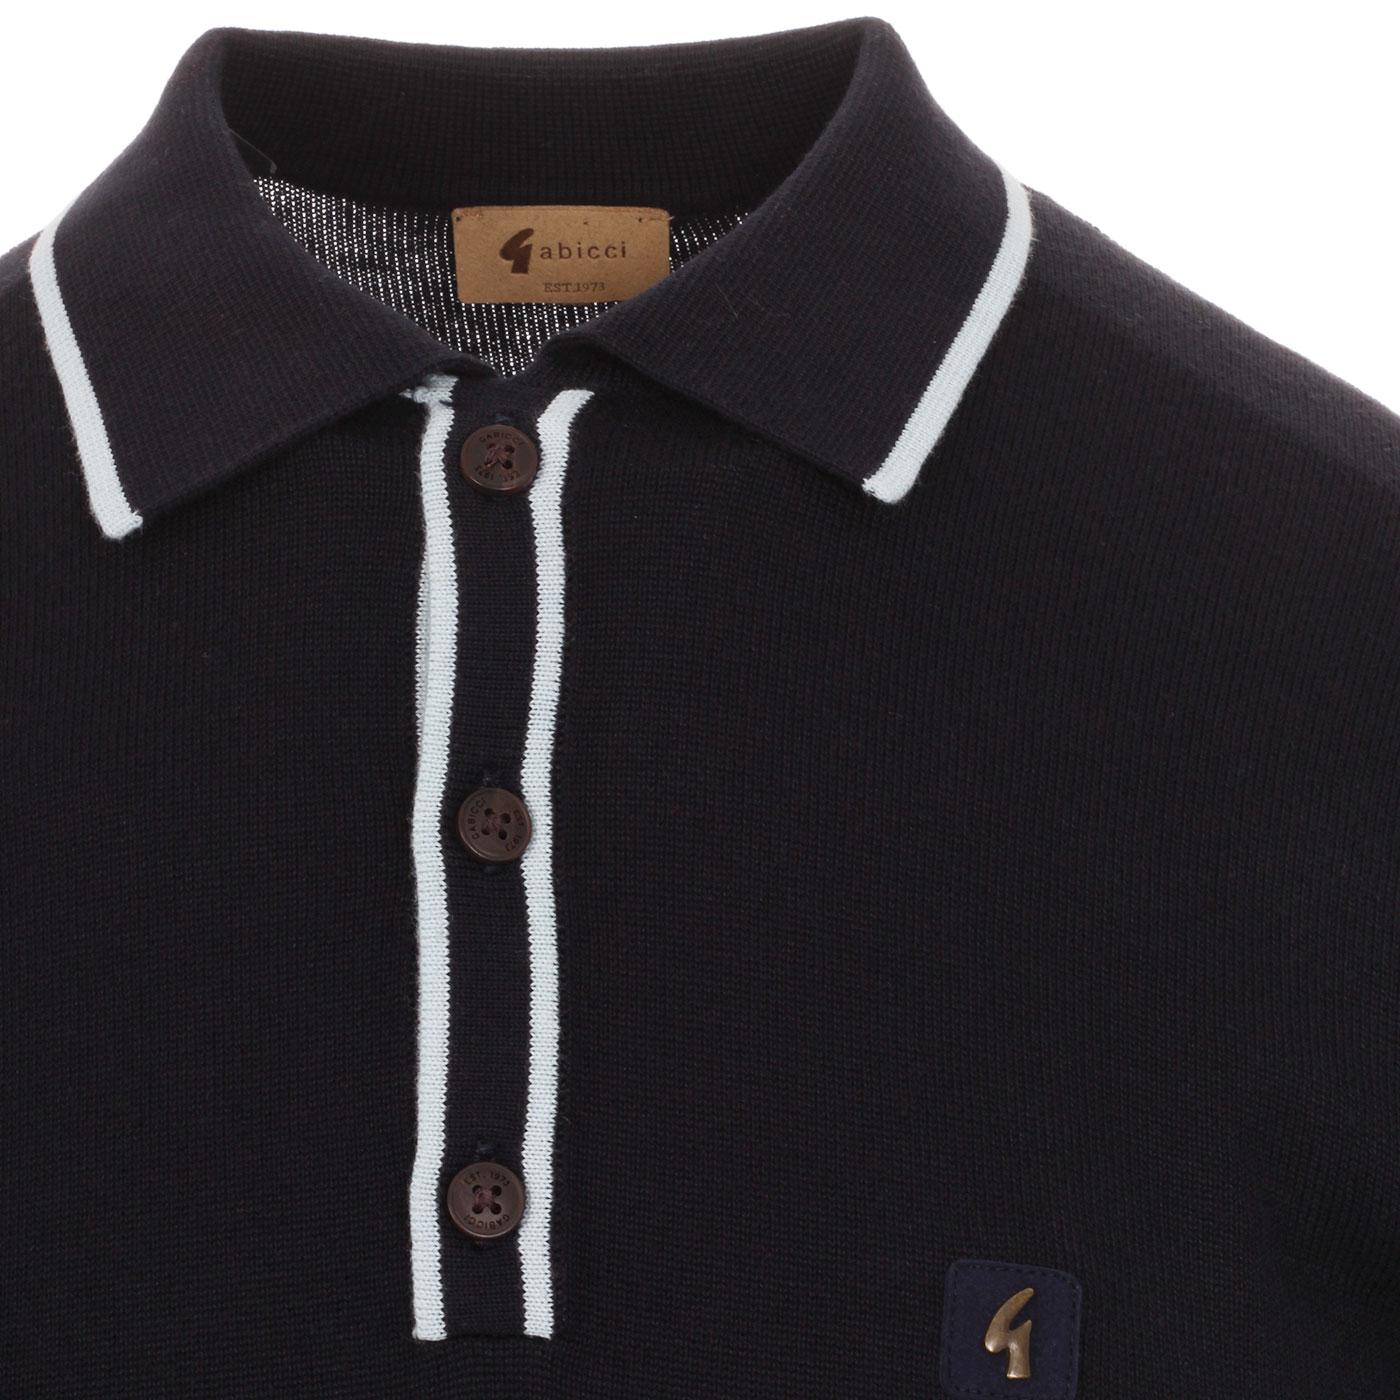 GABICCI VINTAGE Lineker Mod Knitted Tipped Polo Top Navy